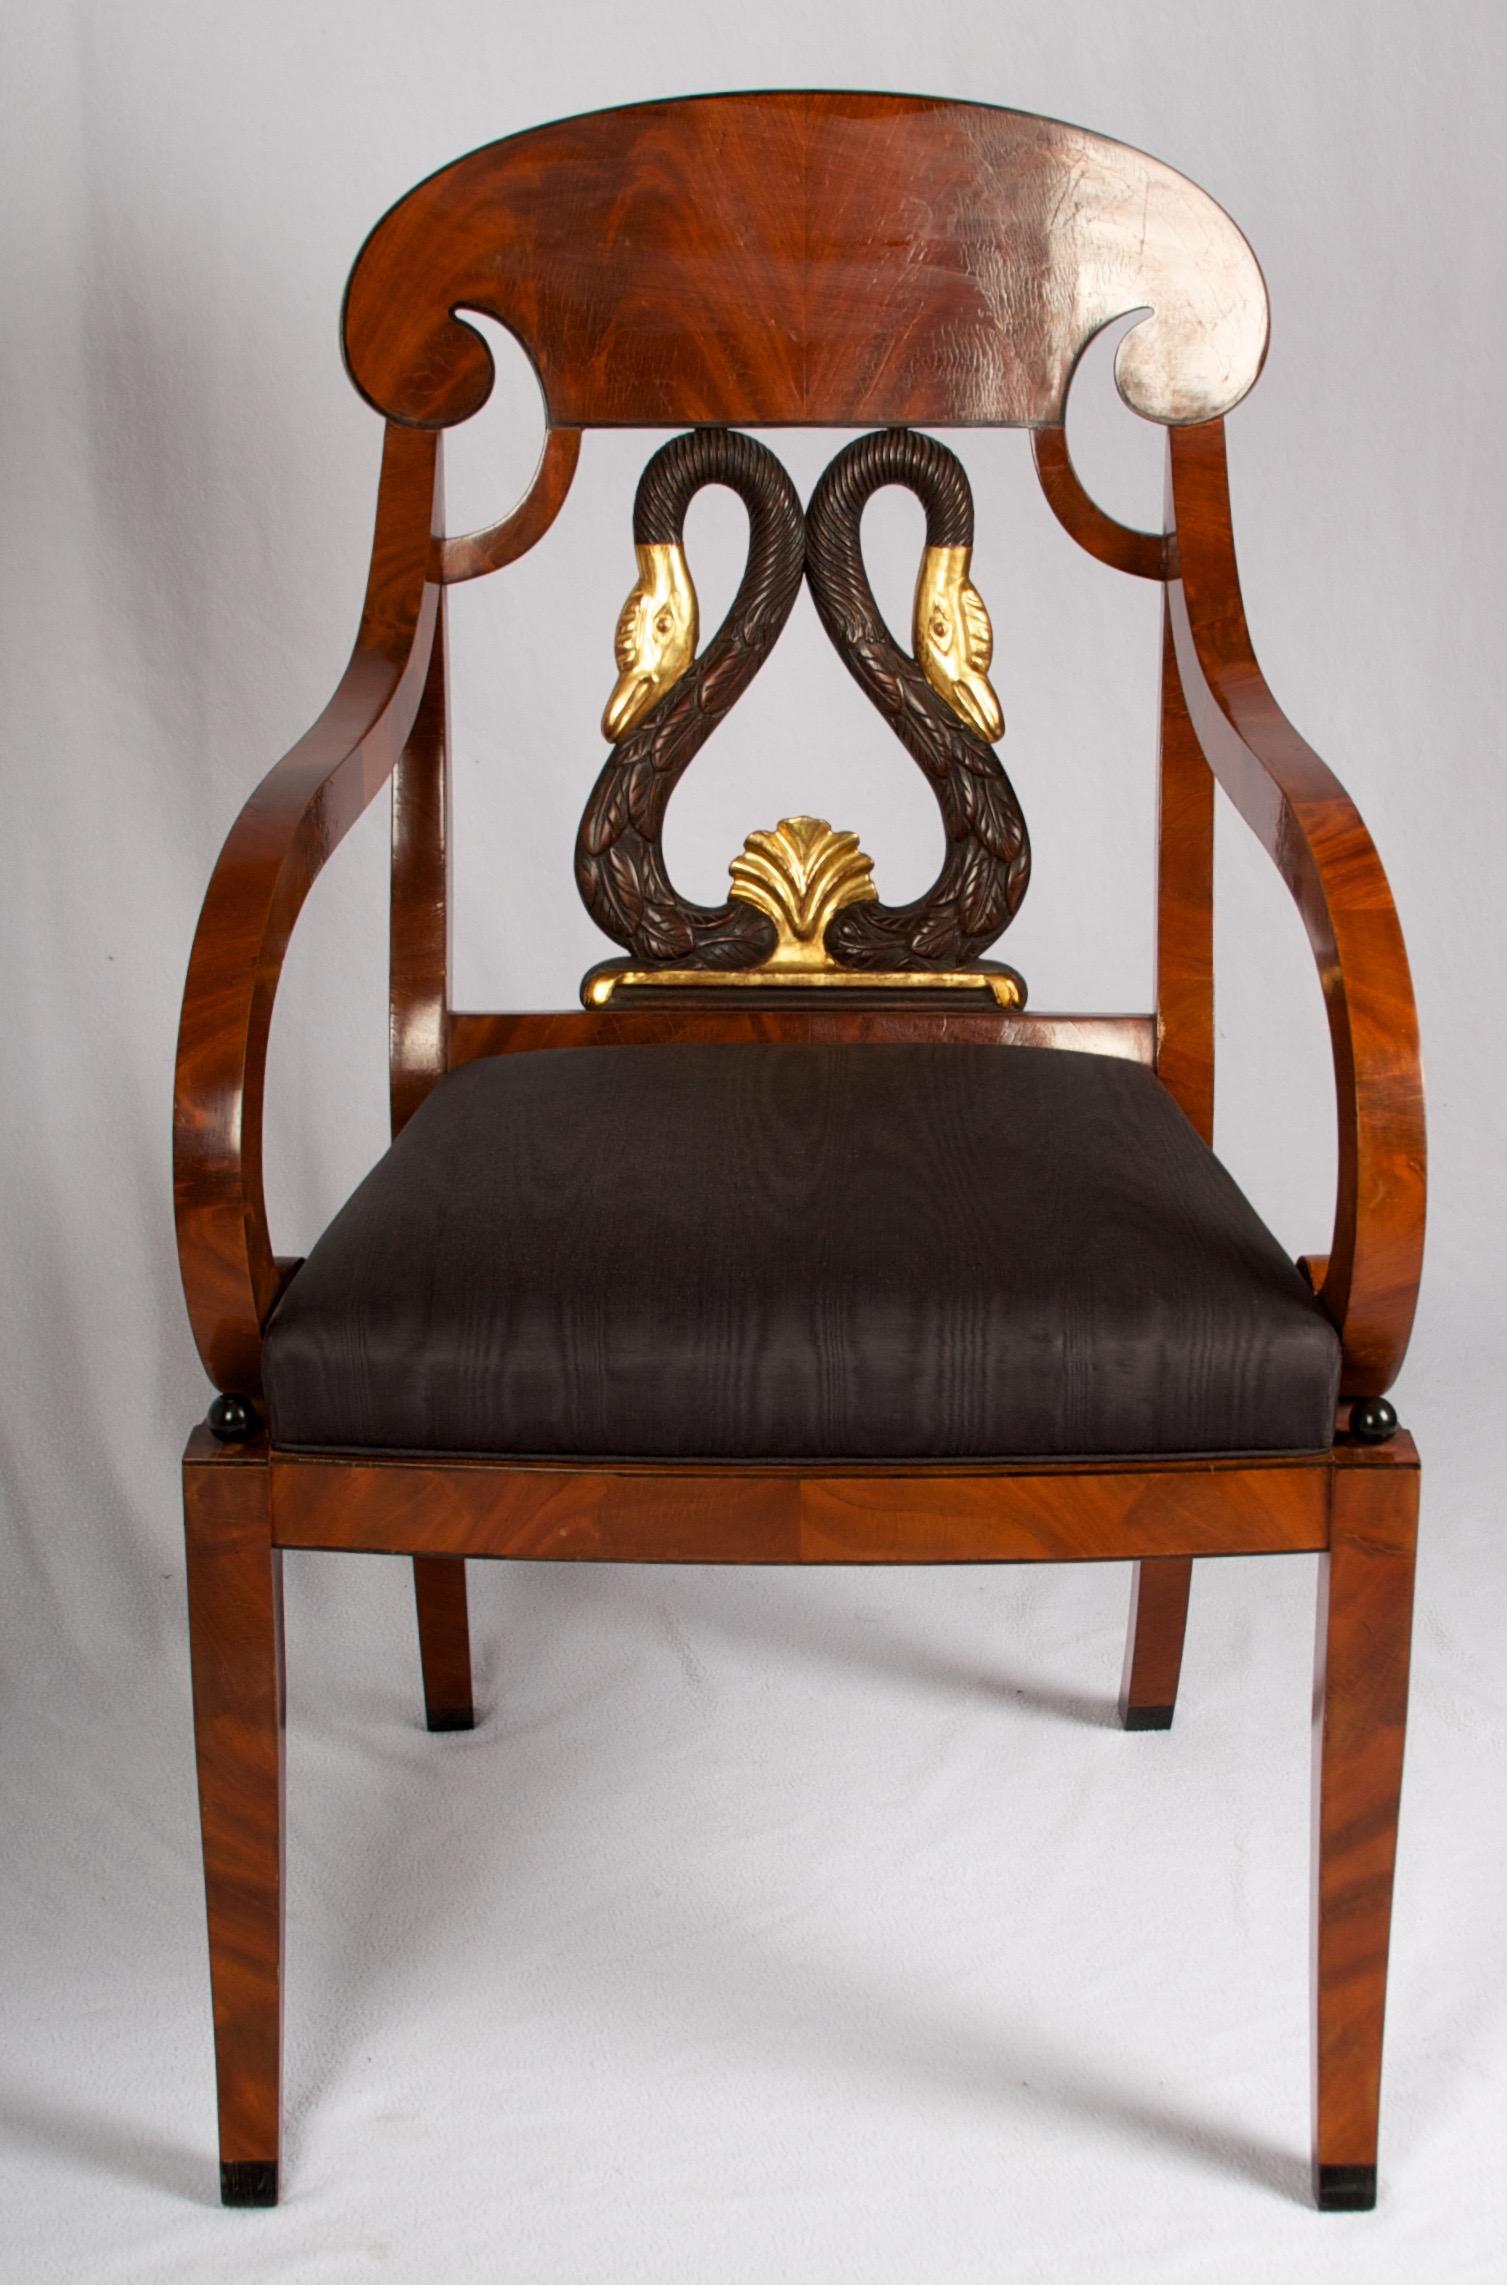 Hand-Carved Russian Biedermeier Style Mahogany Armchair with Gilded Swan Back Detail